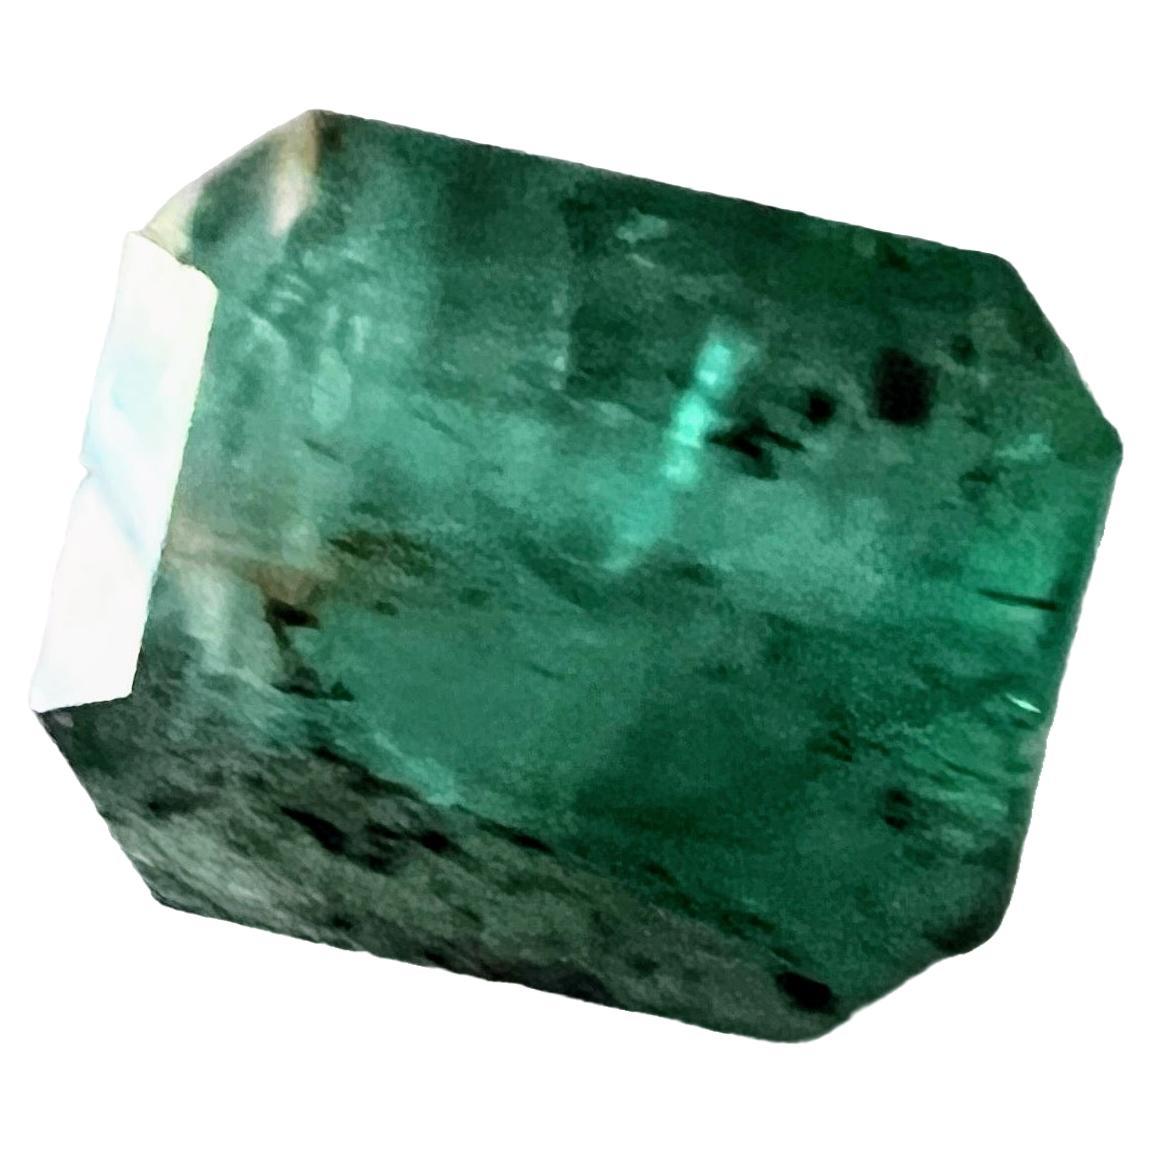 Artisan 7.19ct  No Oil Untreated Natural Emerald Gemstone For Sale